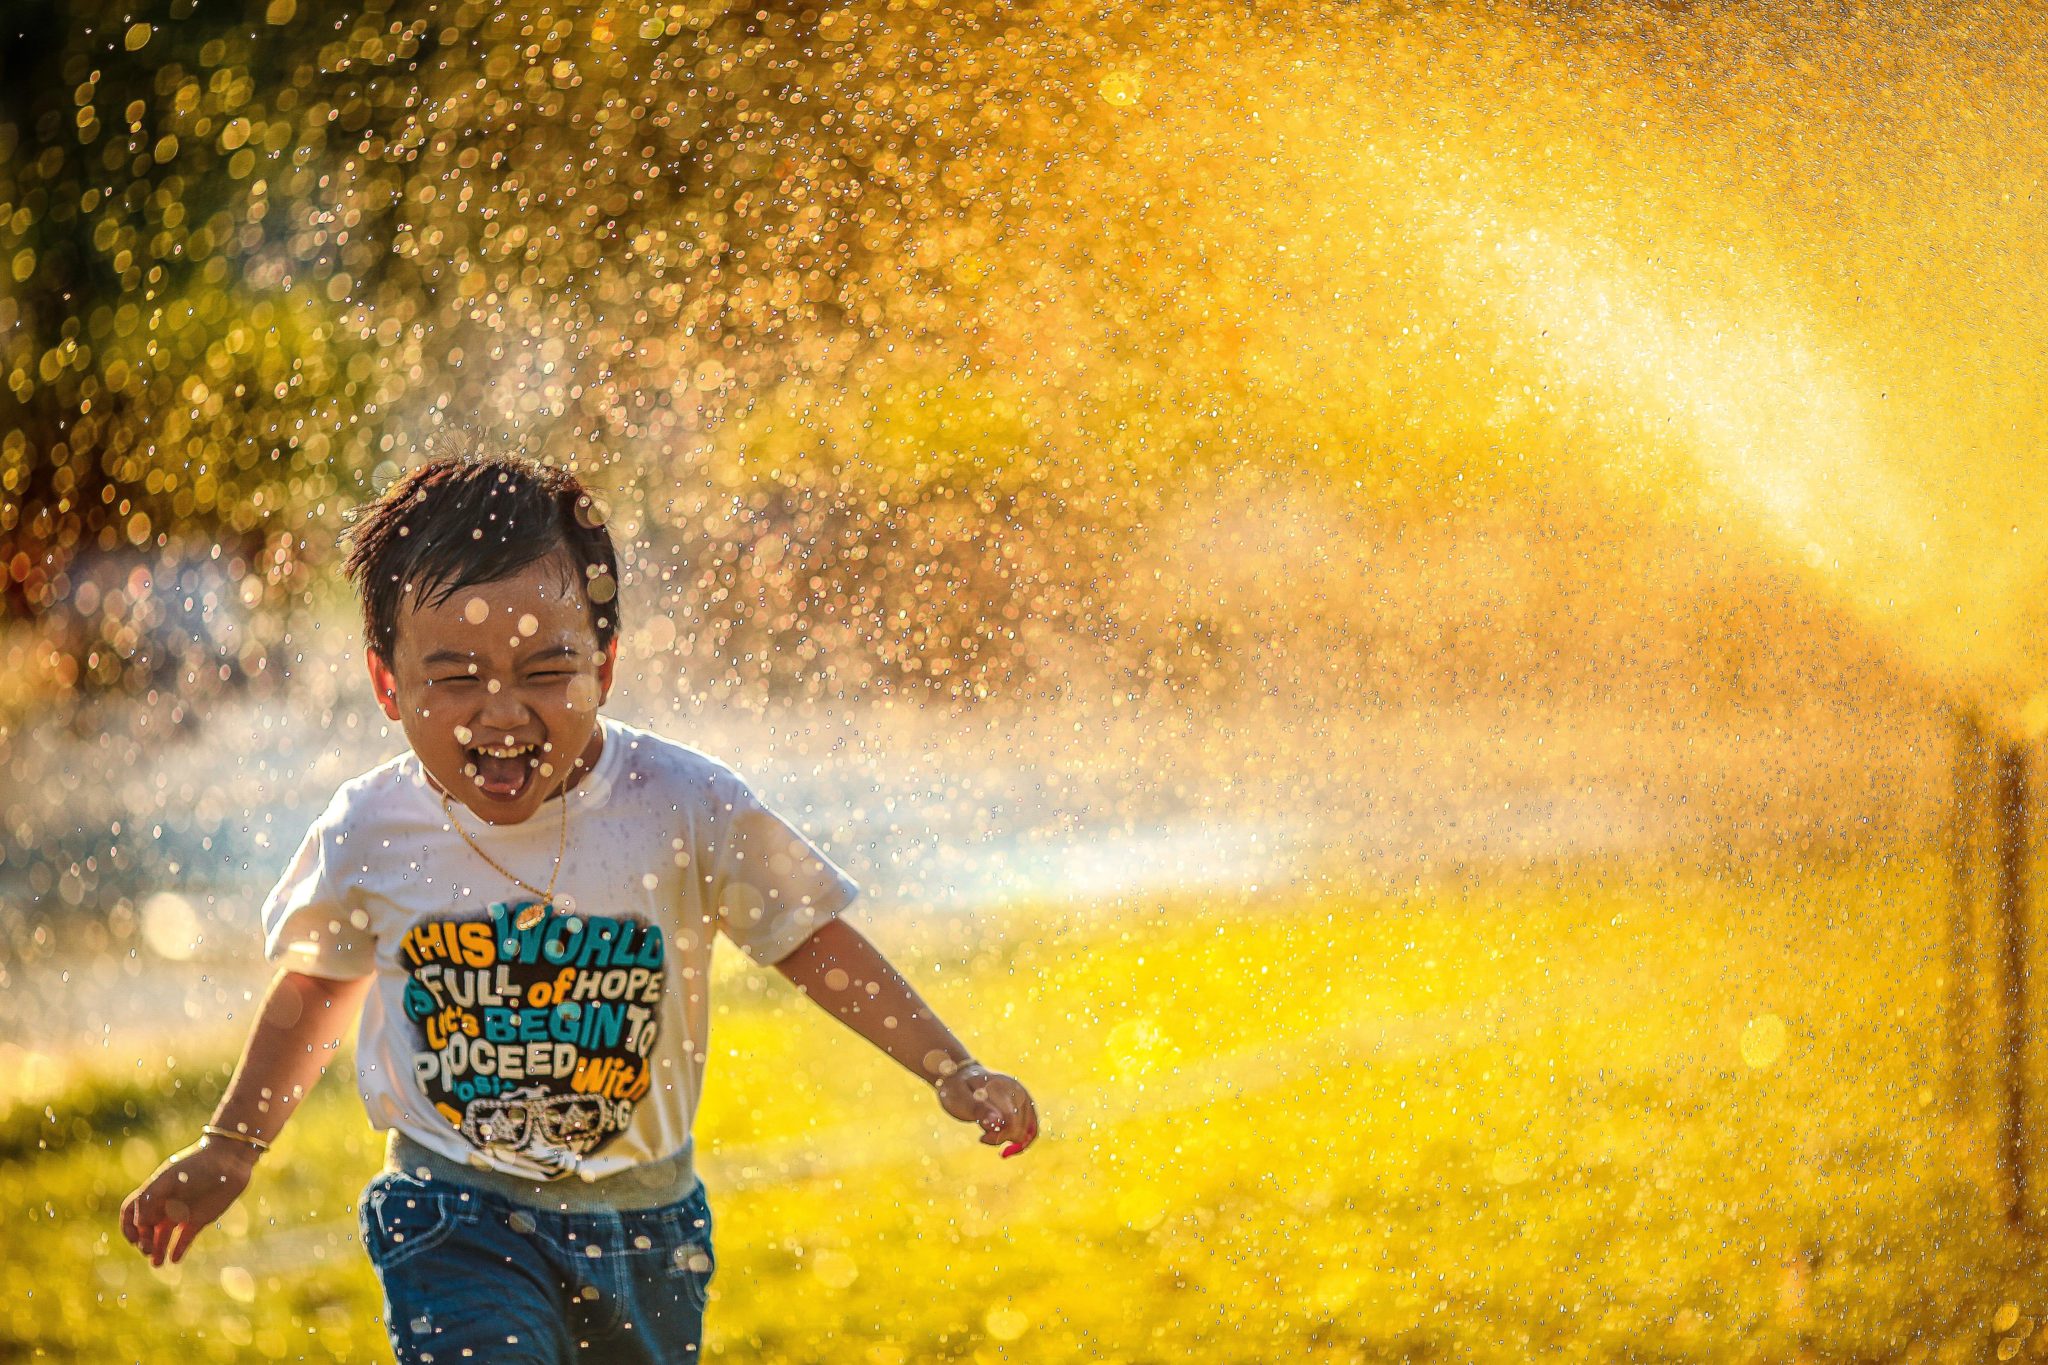 Boy playing with water from garden hose